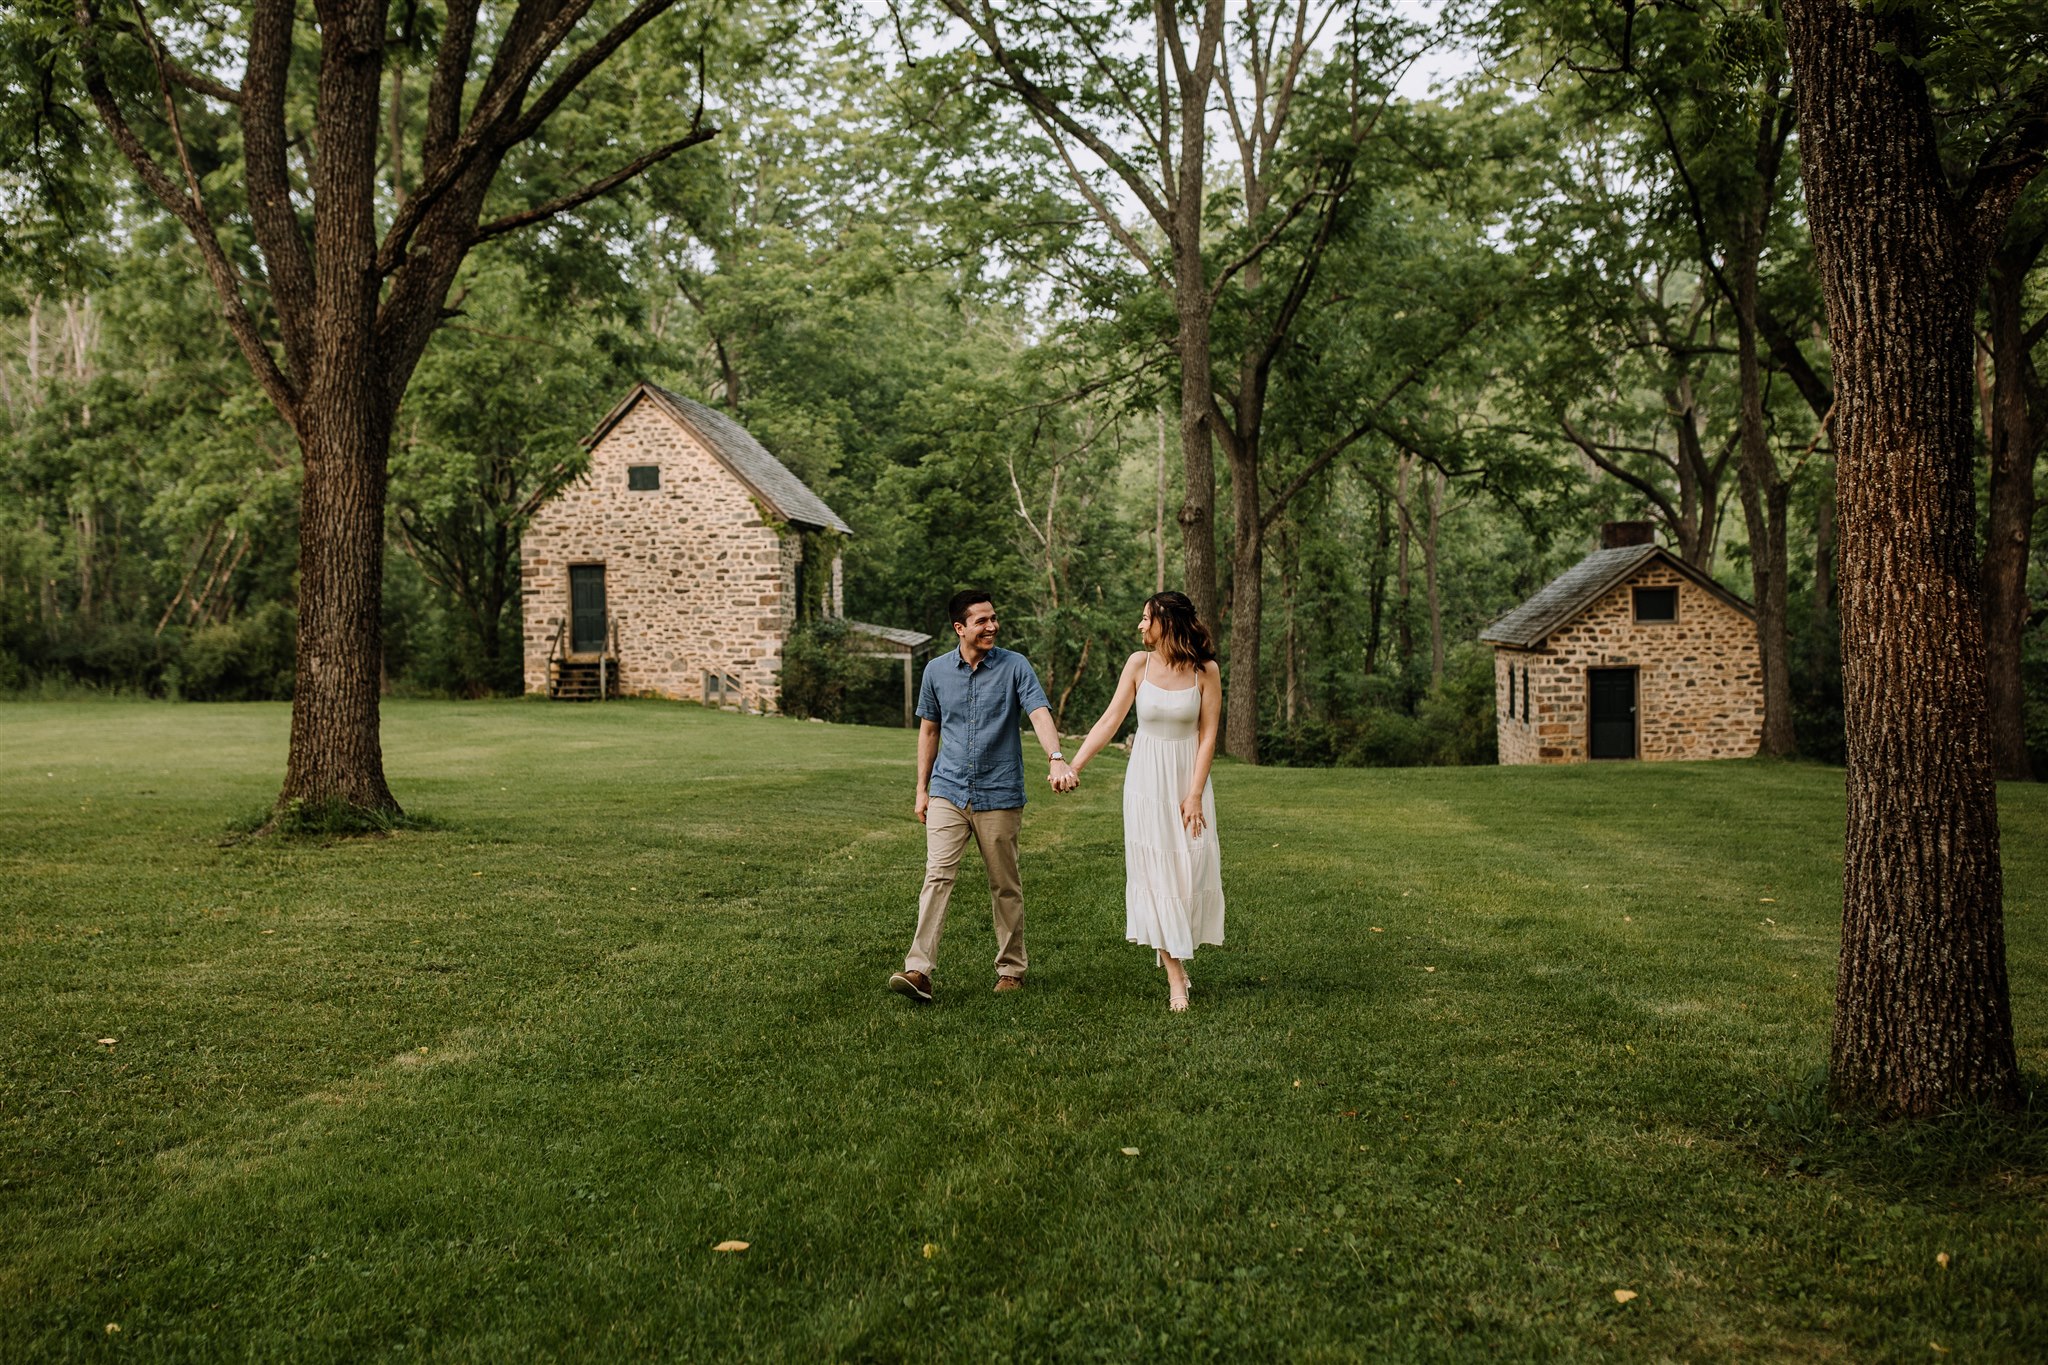 Engagement photo session as Jacobsburg Park with couple walking holding hands and two rustic houses in the background